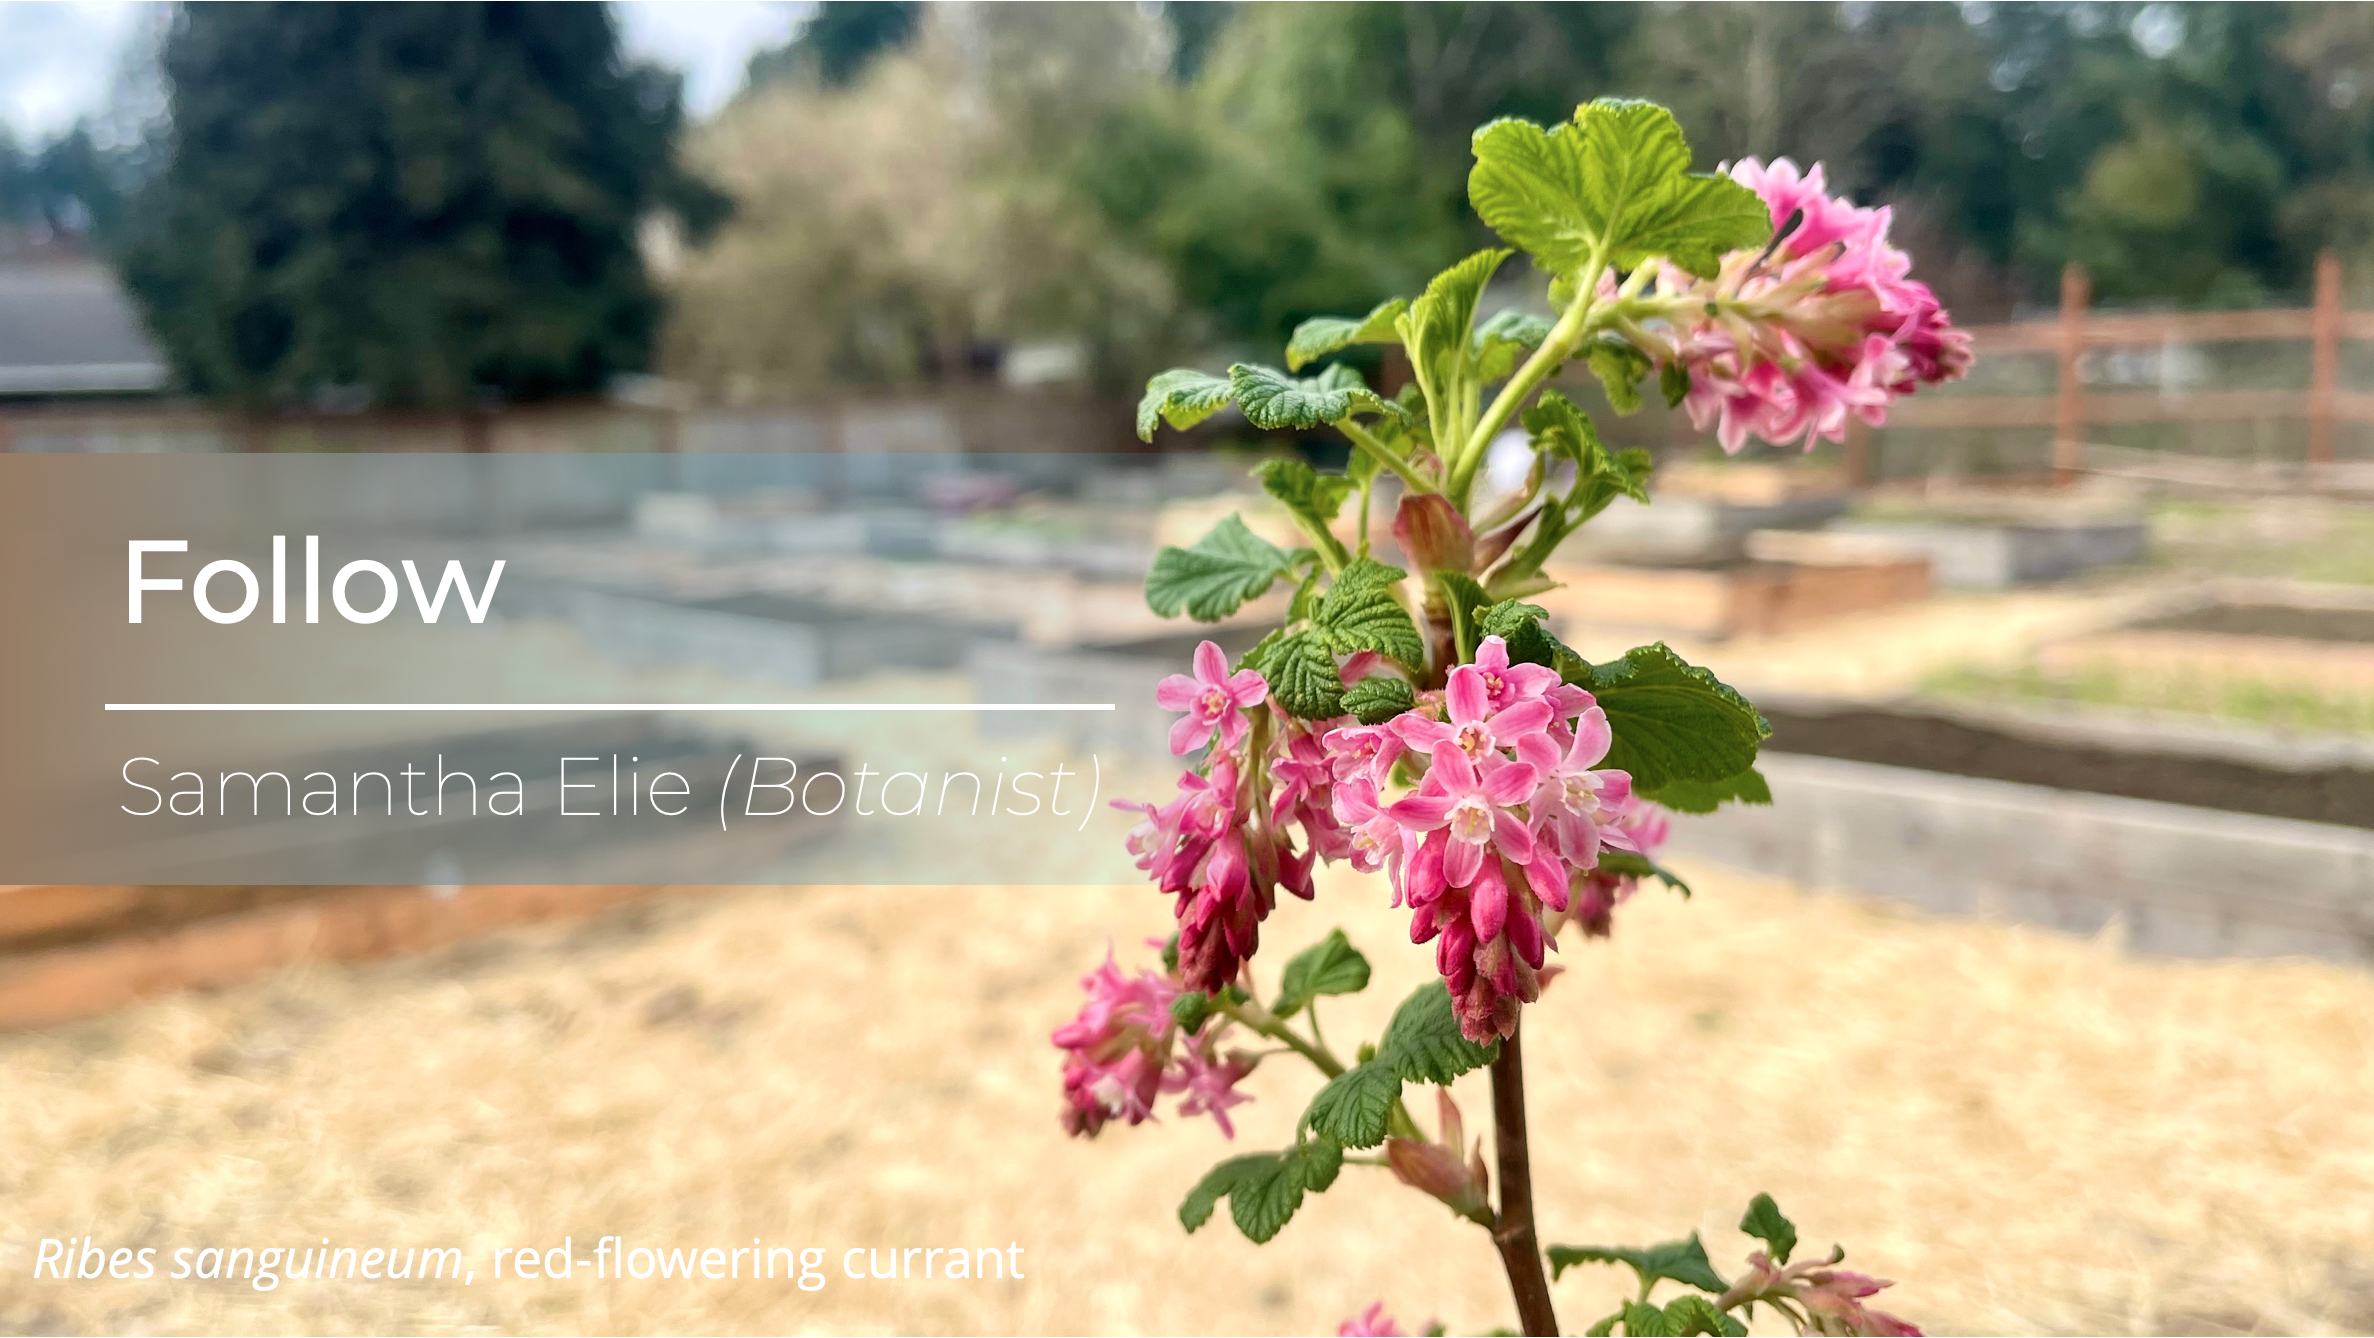 The text "Follow Samantha Elie (Botanist)" over a photo of Ribes sanguineum in bloom over an urban farm